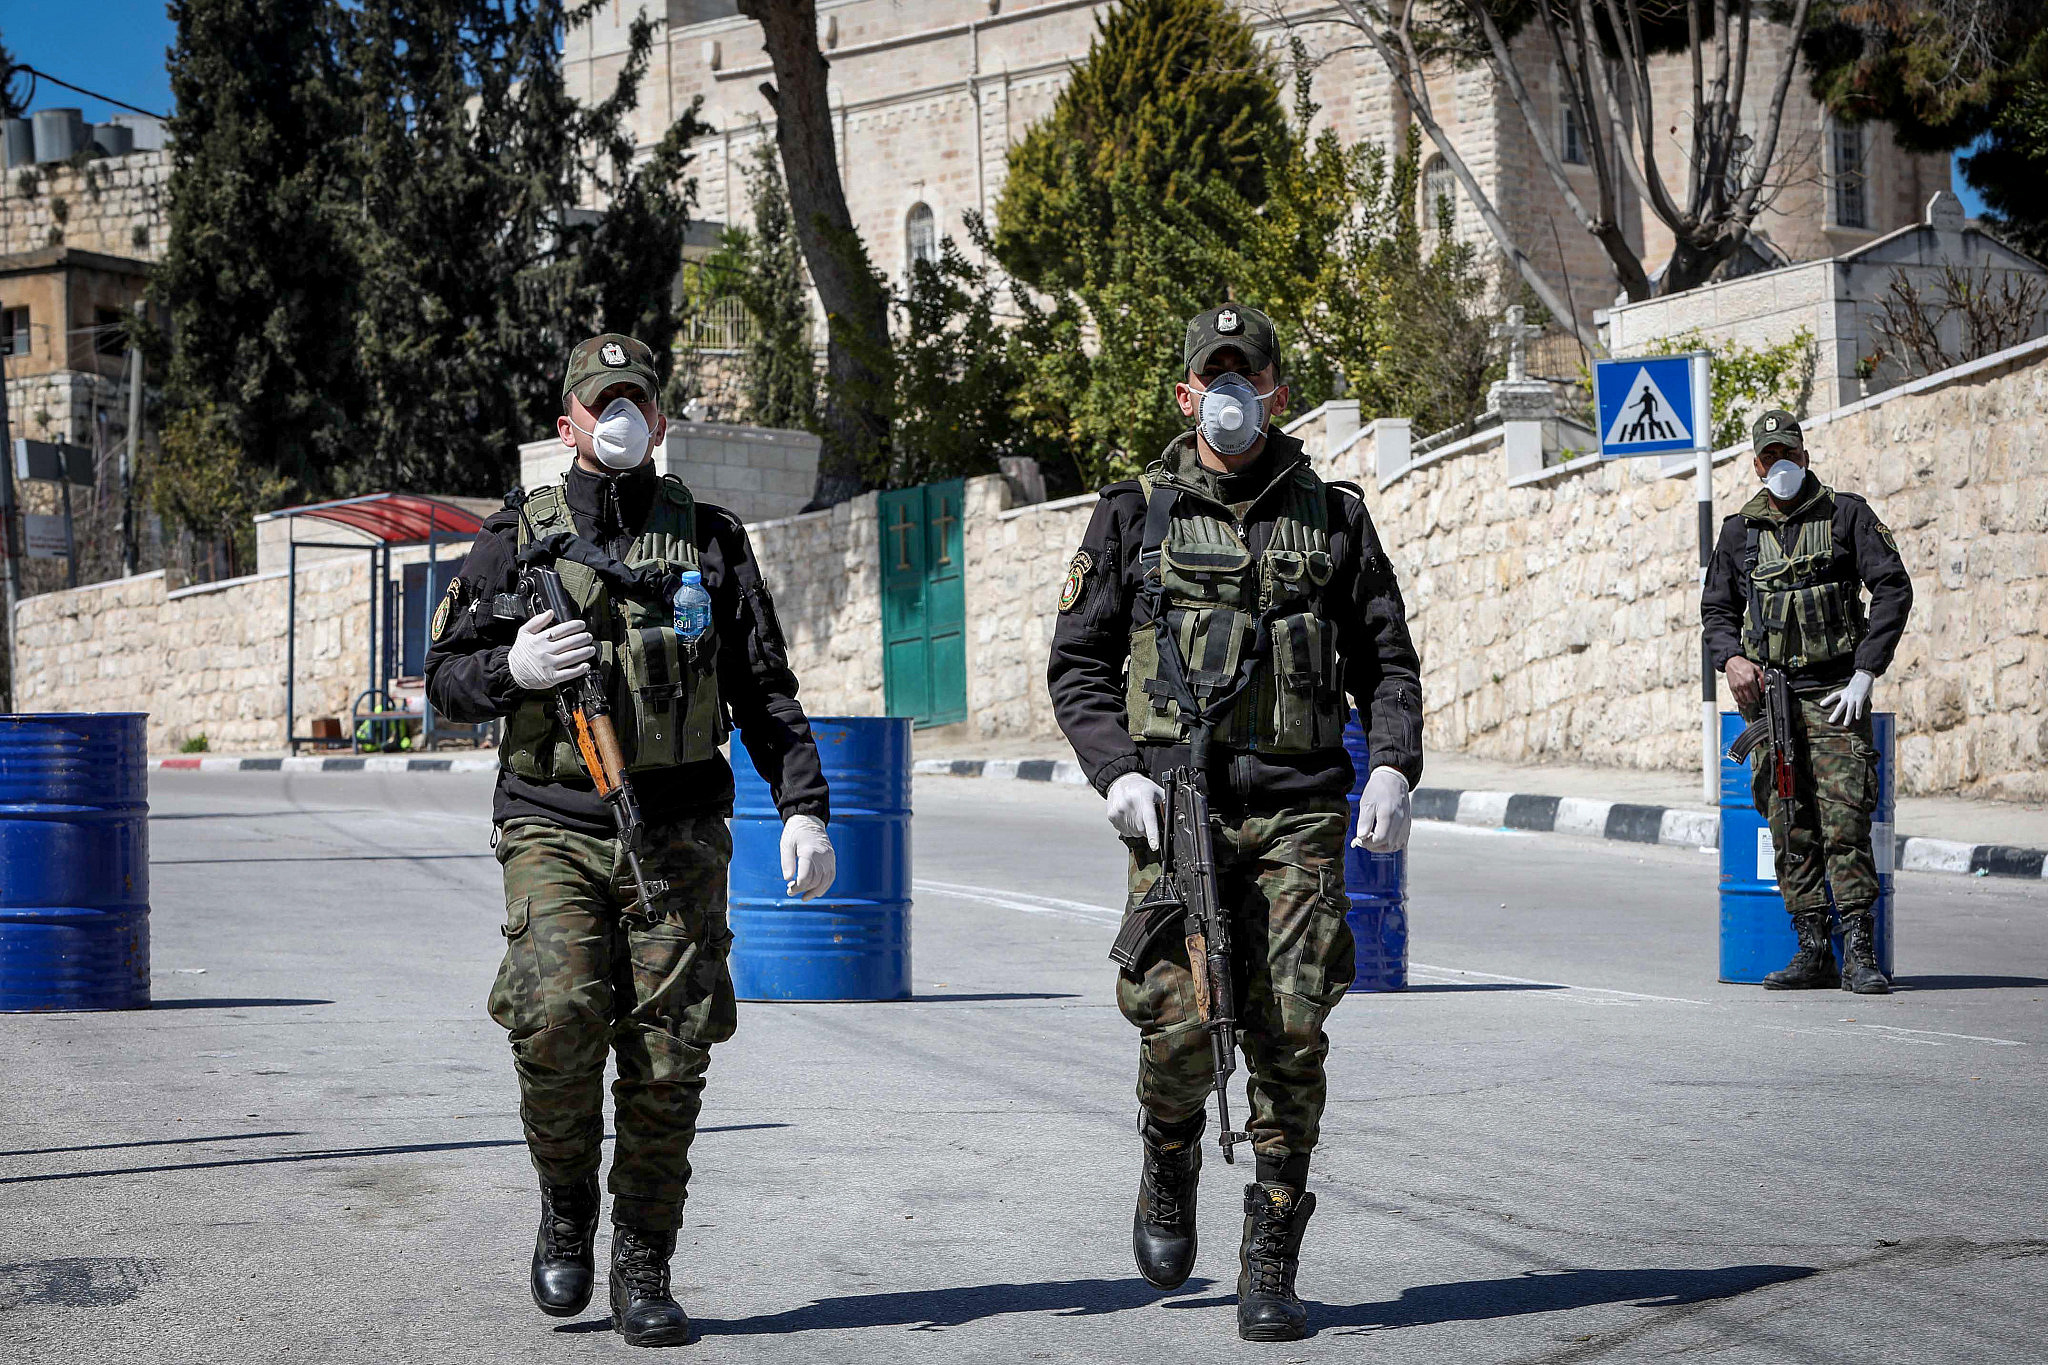 Palestinian security forces wearing face masks block the entrance to the West Bank city of Bethlehem, March 8, 2020. (Wisam Hashlamoun/Flash90)